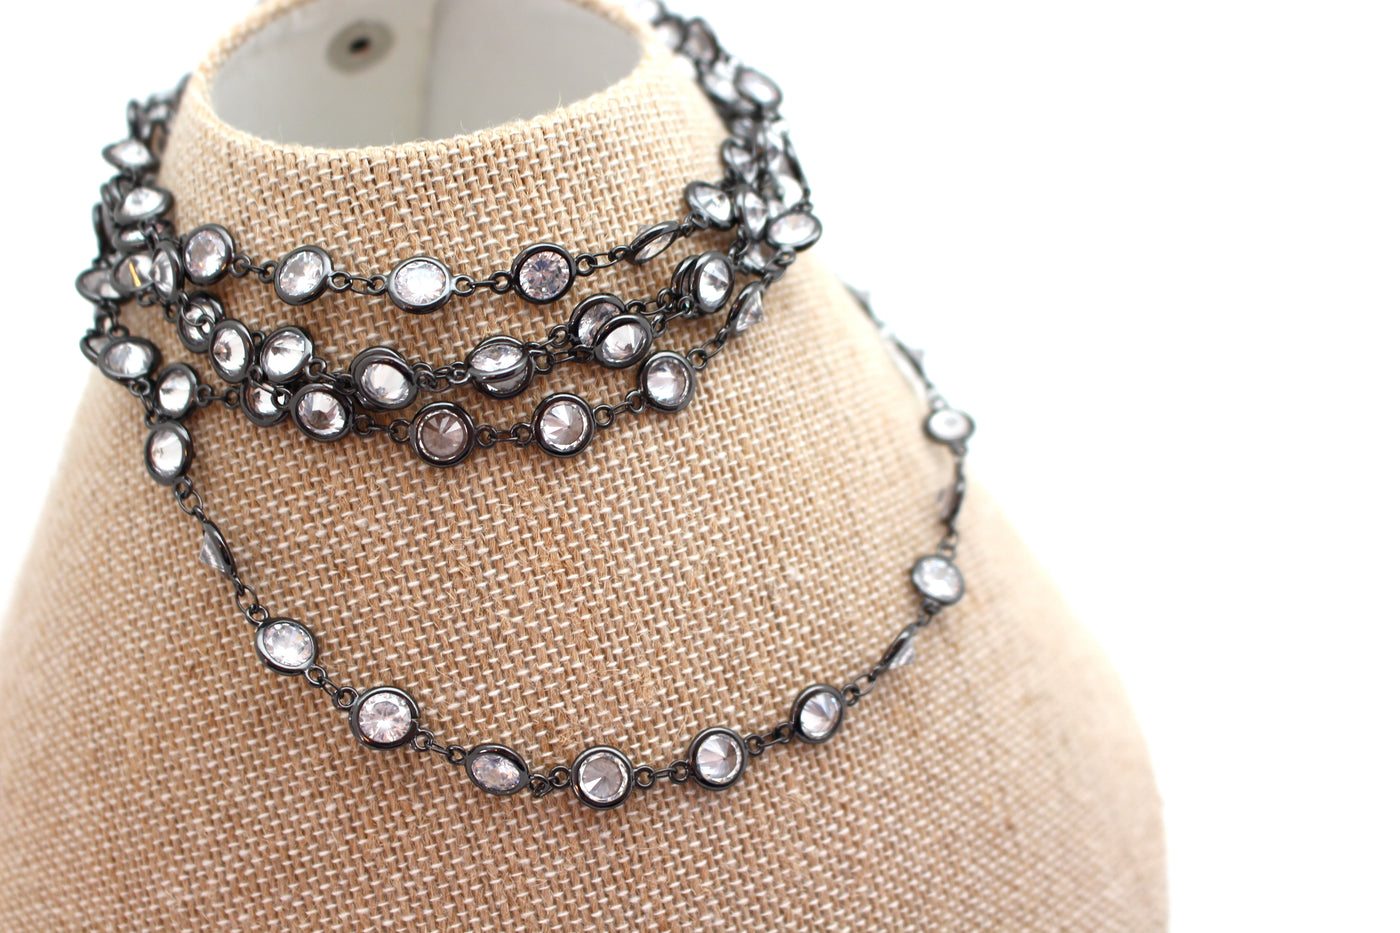 Rhodium Crystal Layer Necklace by Karli Buxton - Corinne an Affordable Women's Clothing Boutique in the US USA